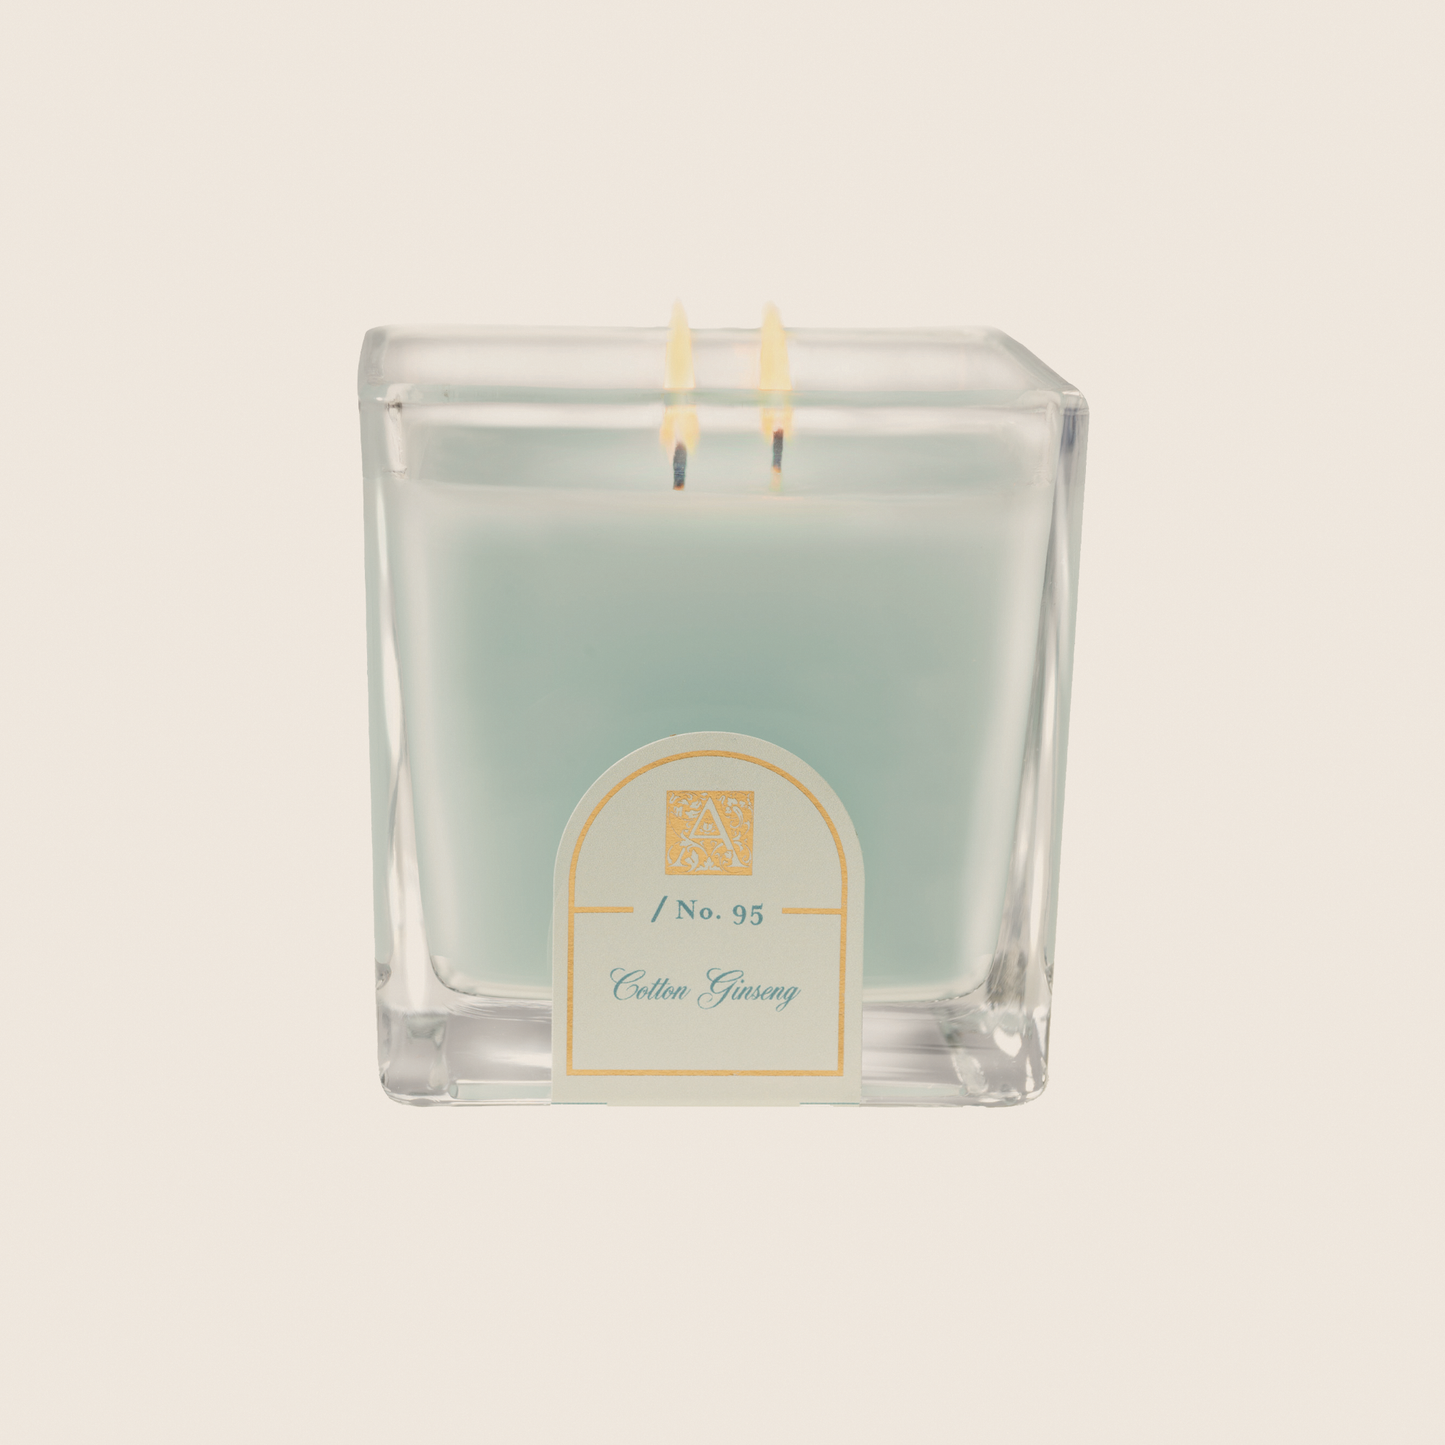 Cotton Ginseng - Cube Glass Candle